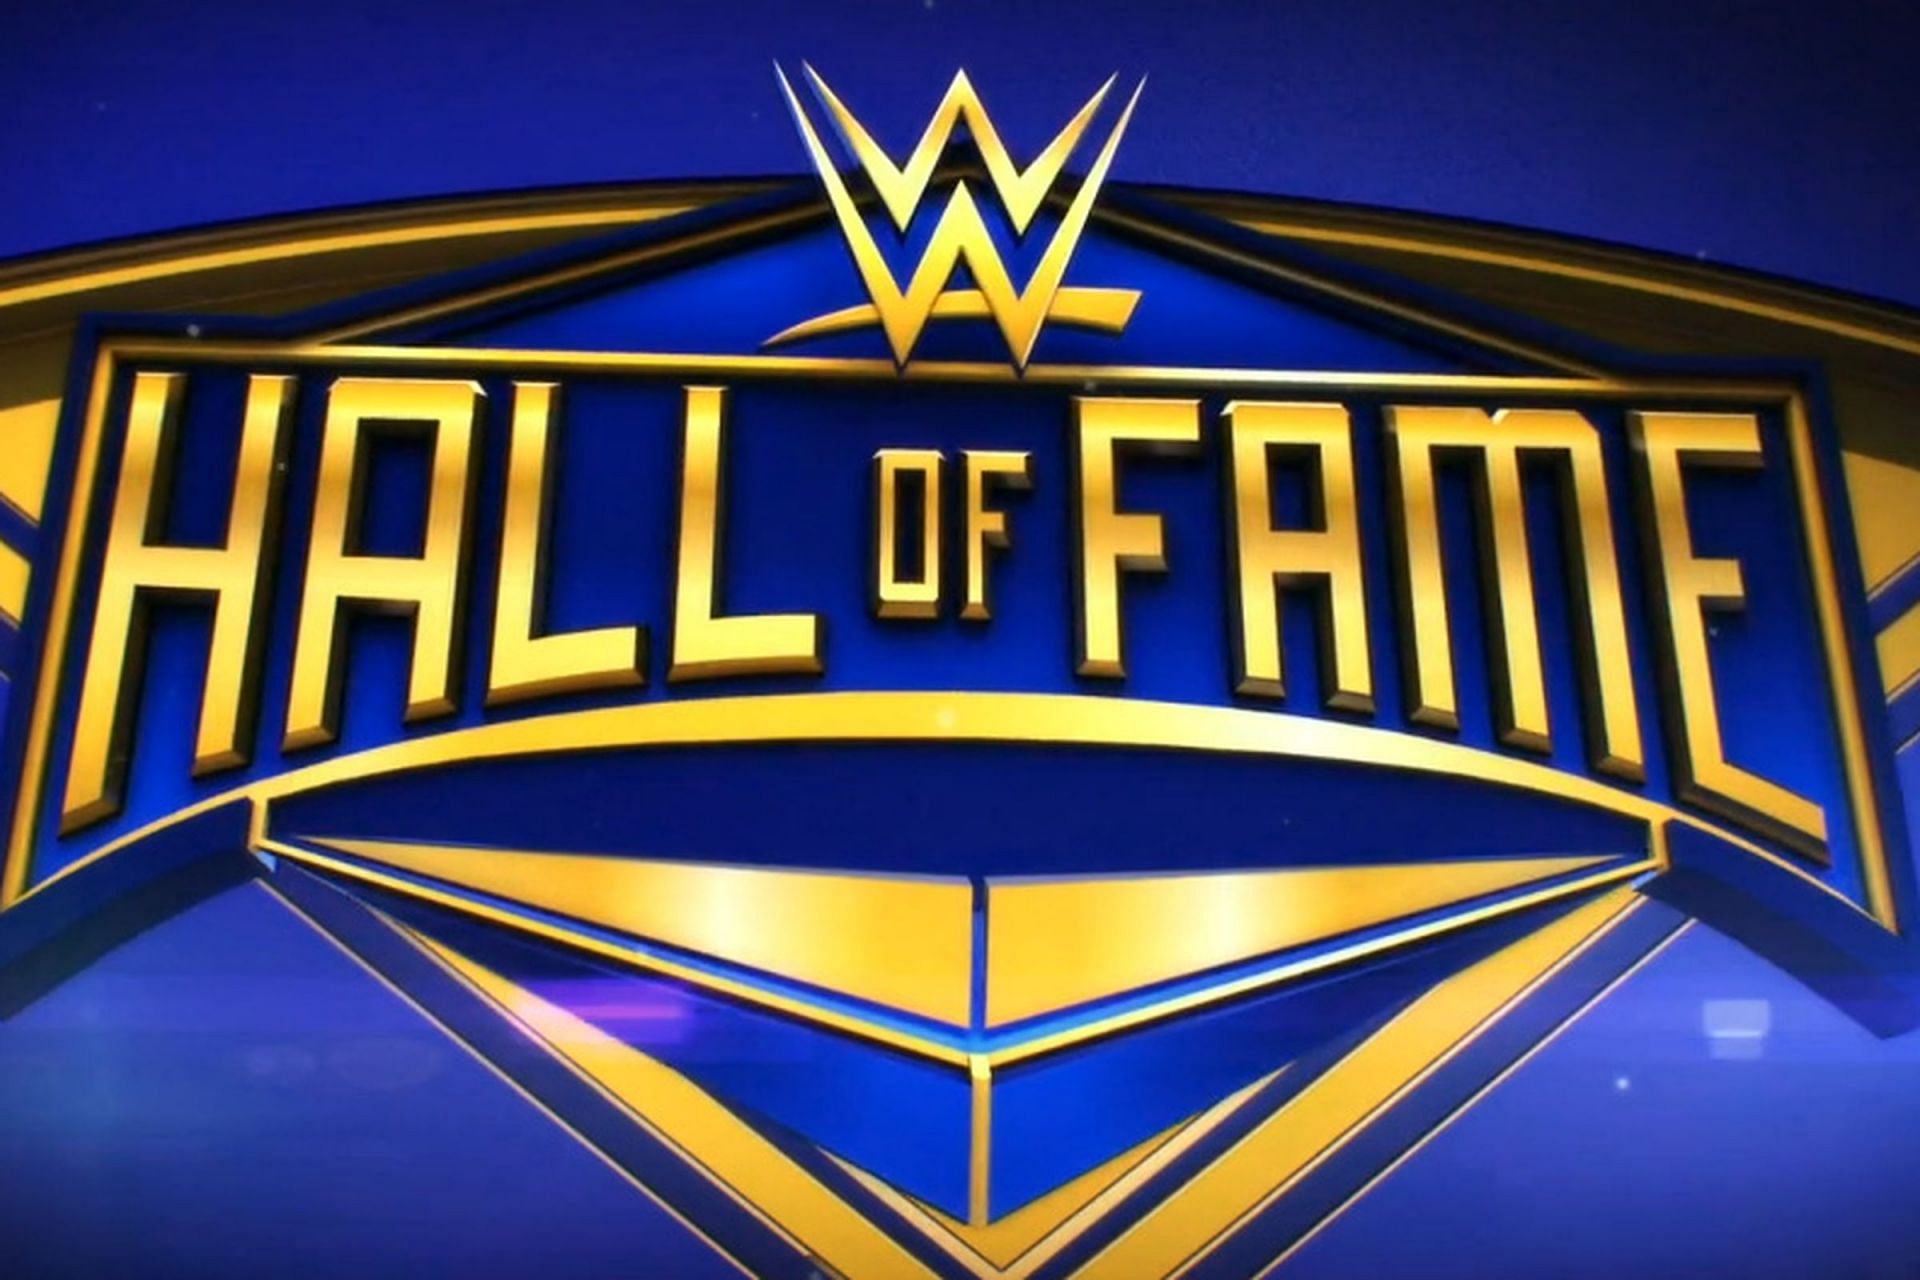 WWE Hall of Fame Logo. These 5 WWE Hall of Famers never won a championship in their WWE career.